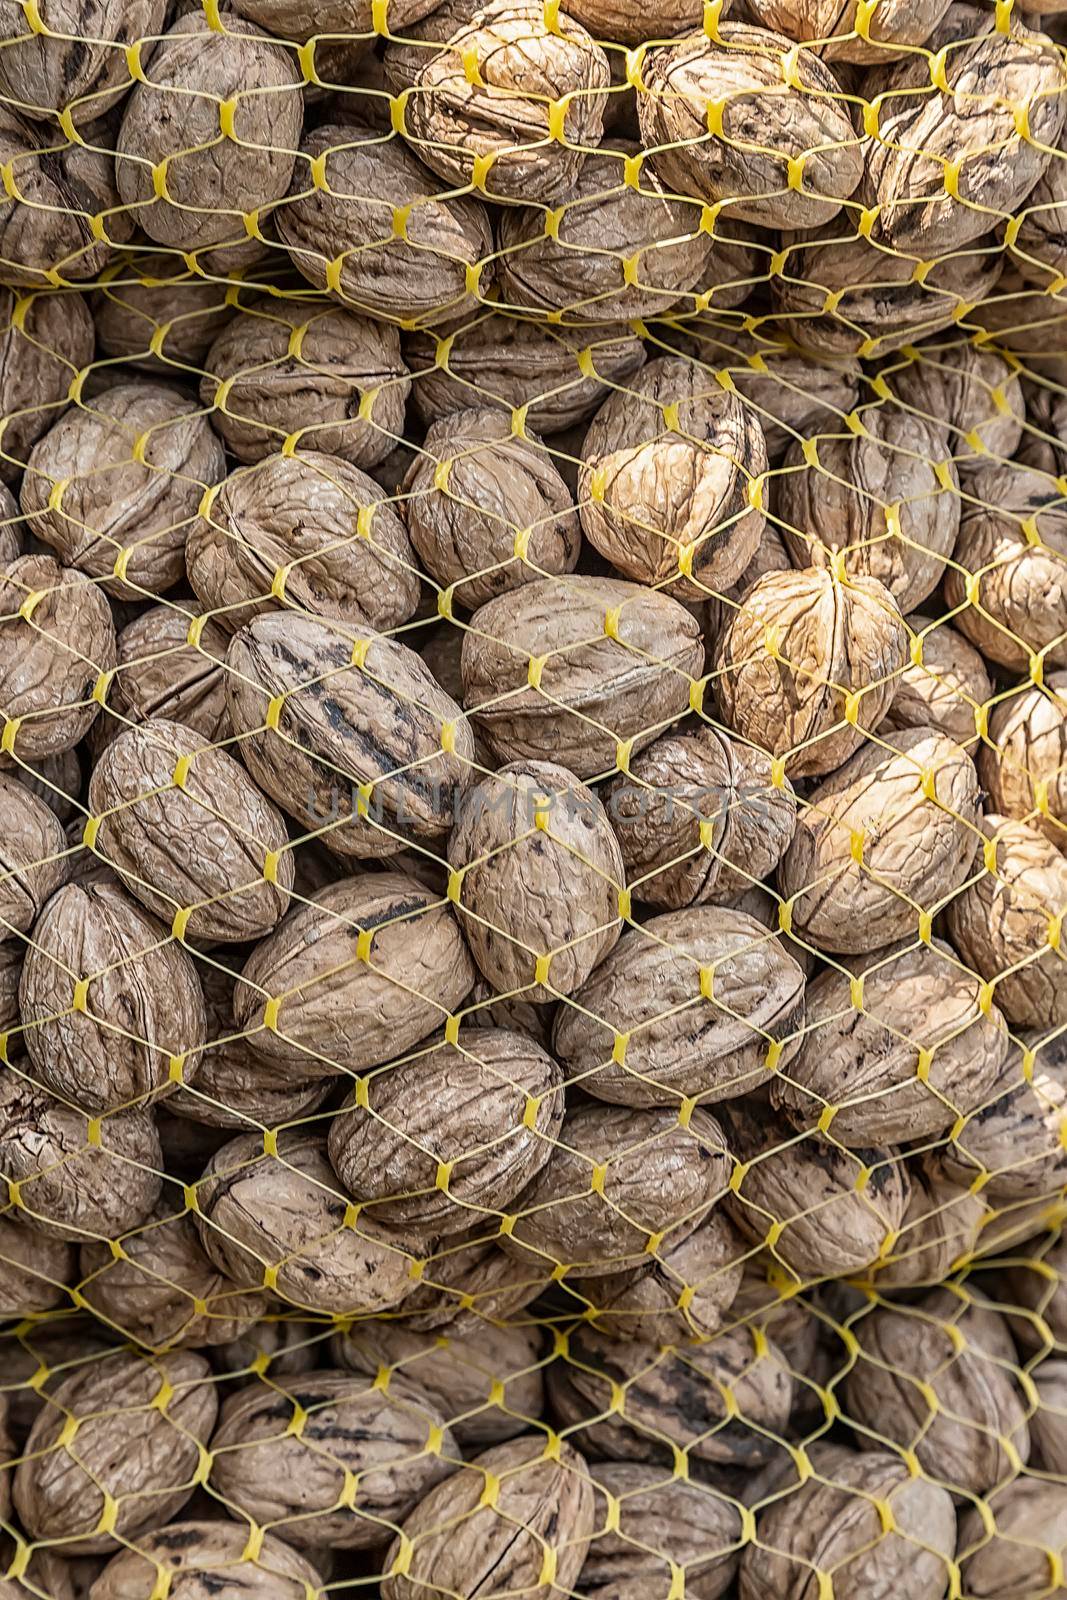 Lots of walnuts in a net bag at a market. Vertical view by EdVal